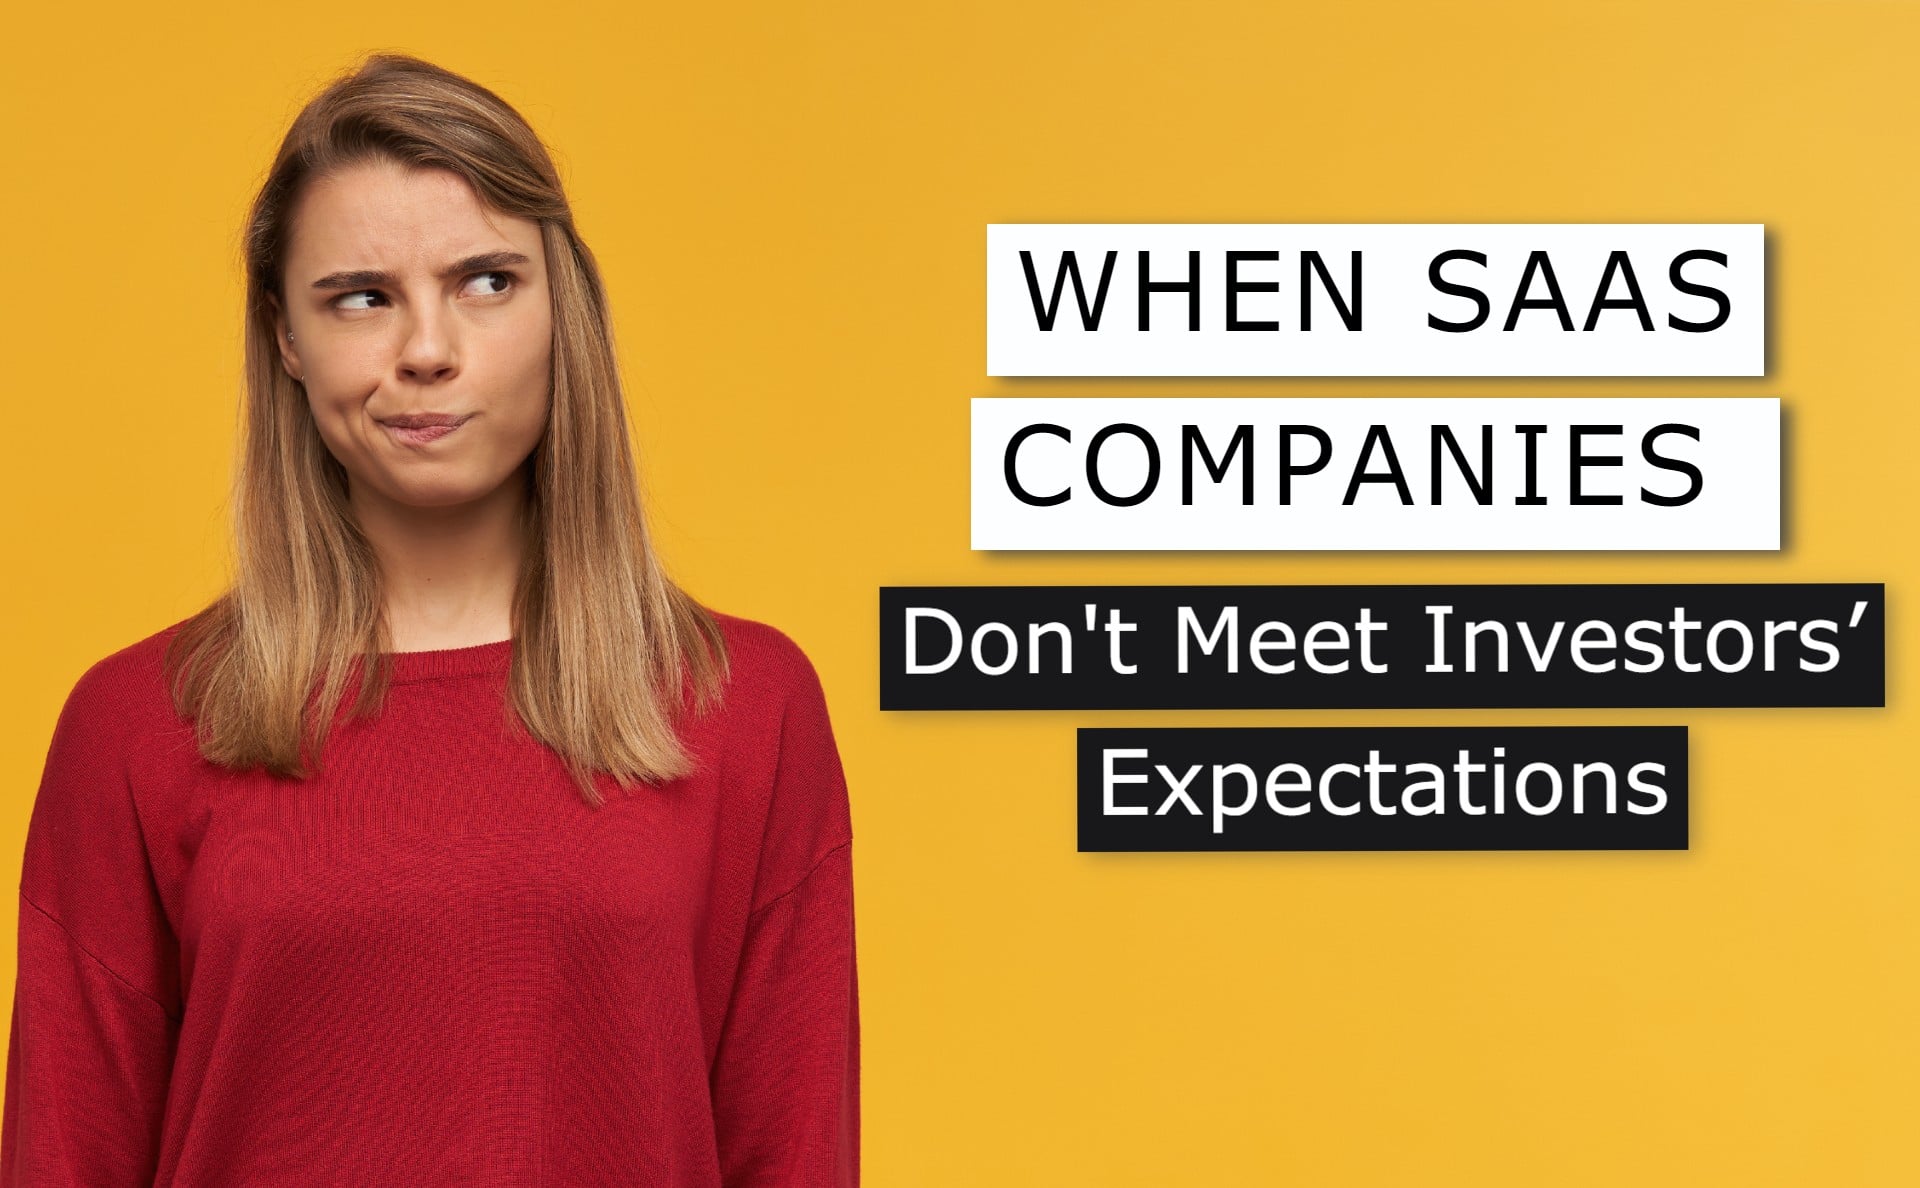 What Happens When SaaS Companies Don’t Meet Investors’ Expectations?